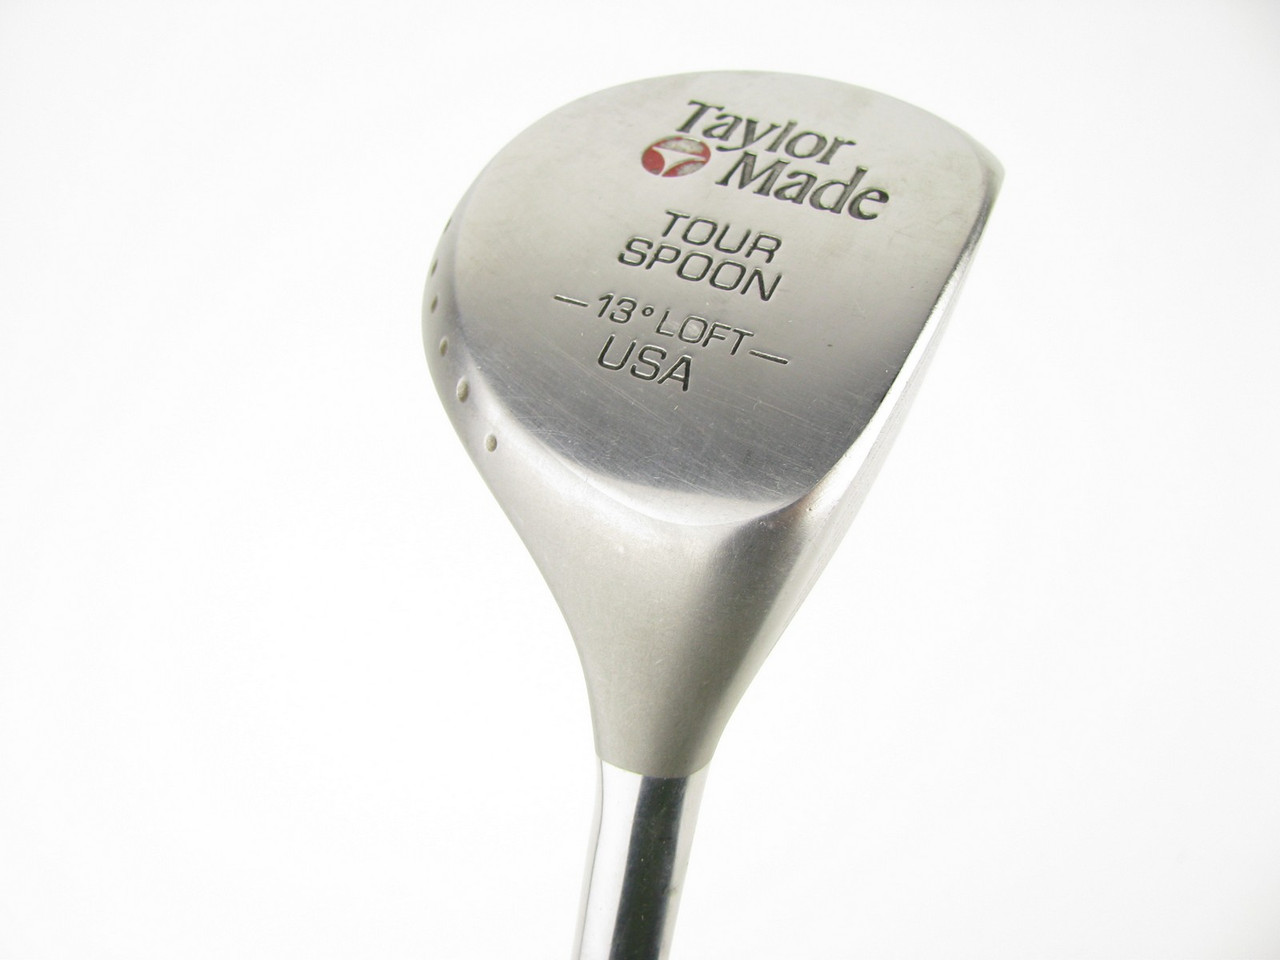 taylormade tour spoon review